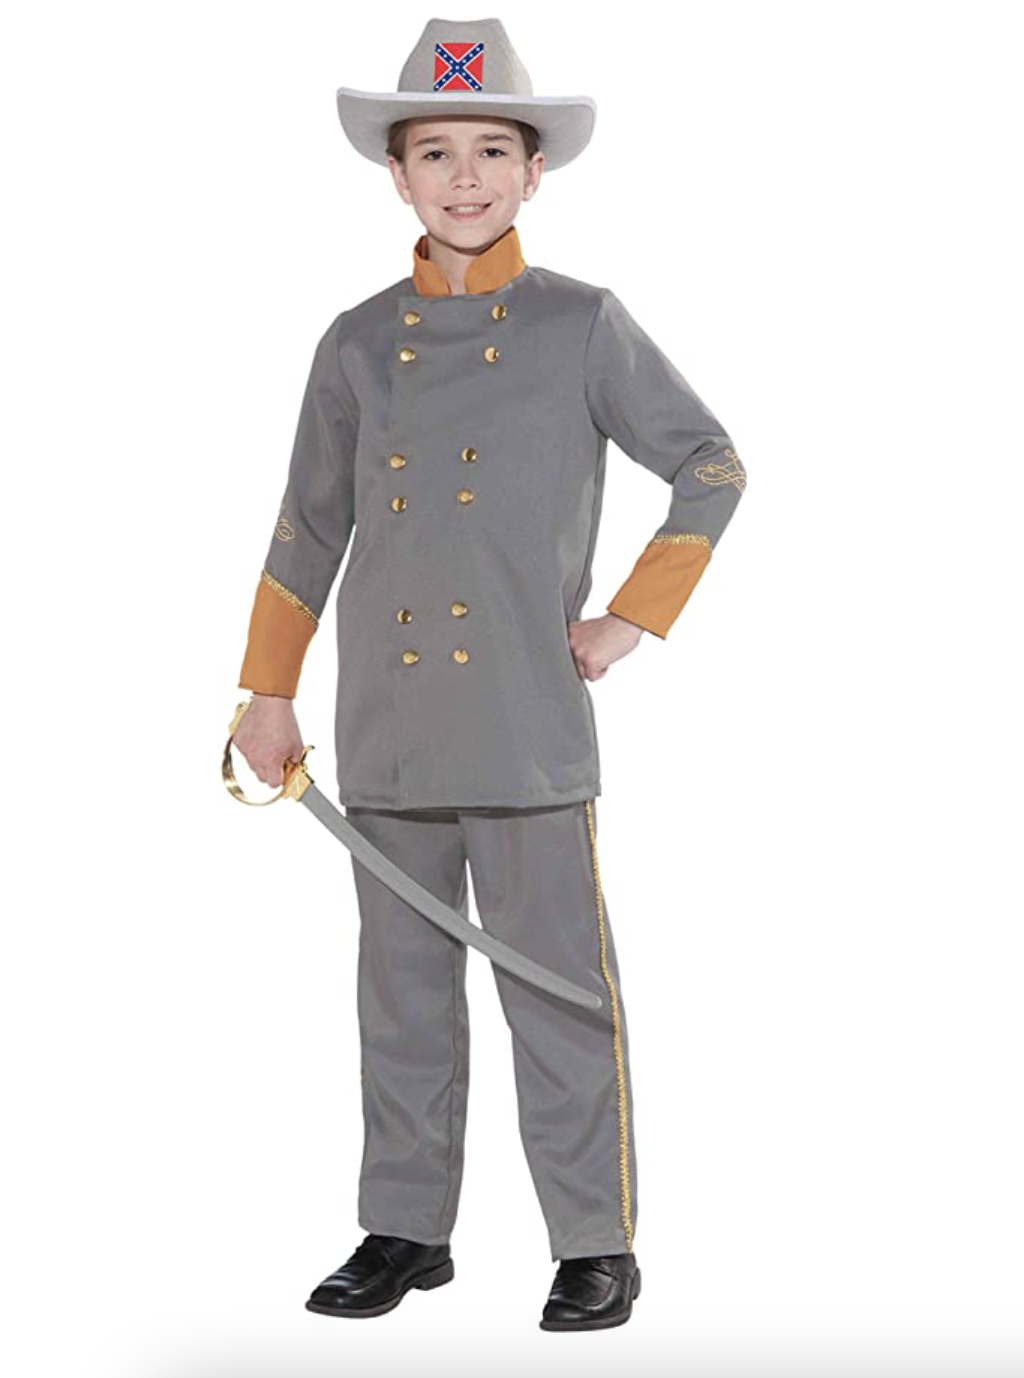 A child wearing a Confederate officer uniform while holding a sword